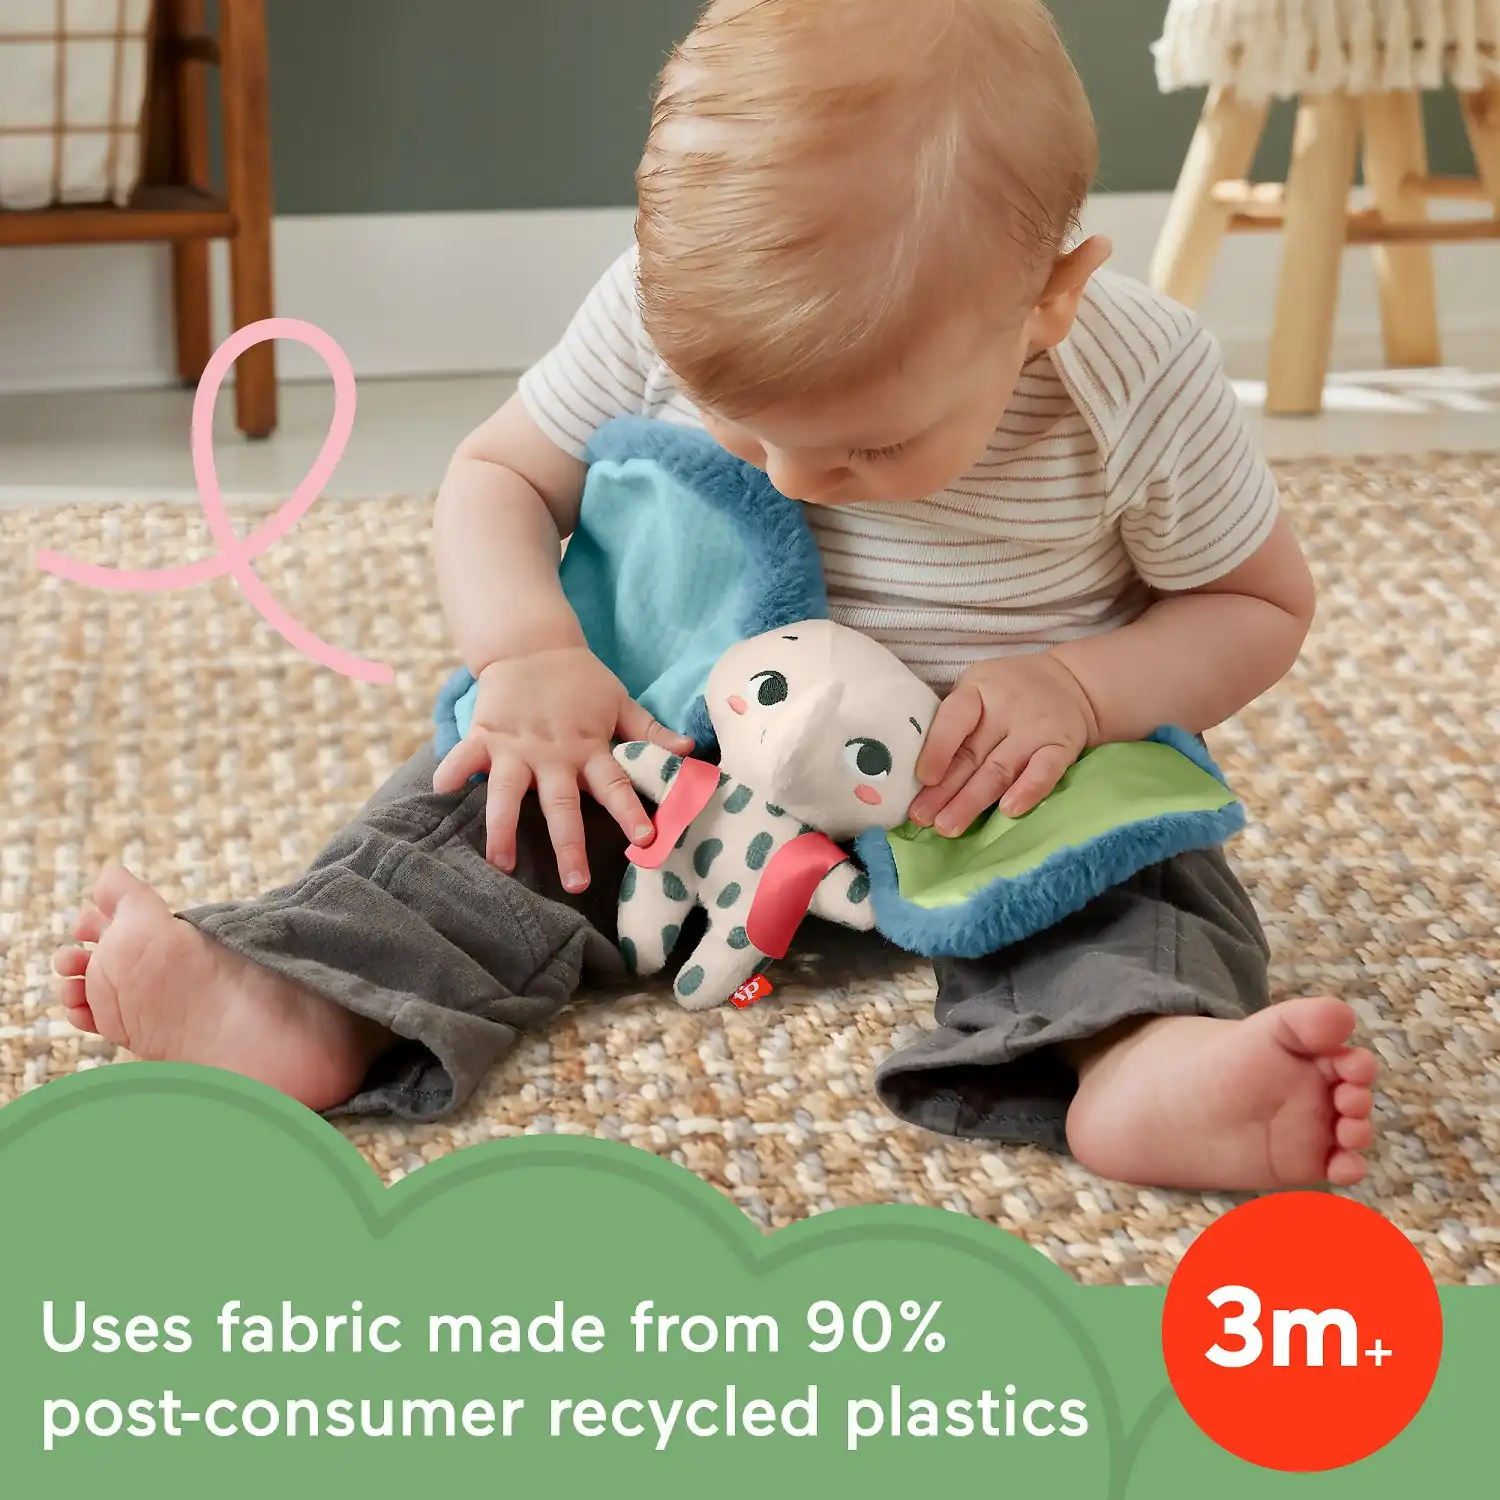 Fisher-price - Planet Friends All Ears Lovey Baby Sensory Toy Plush Elephant For Newborns